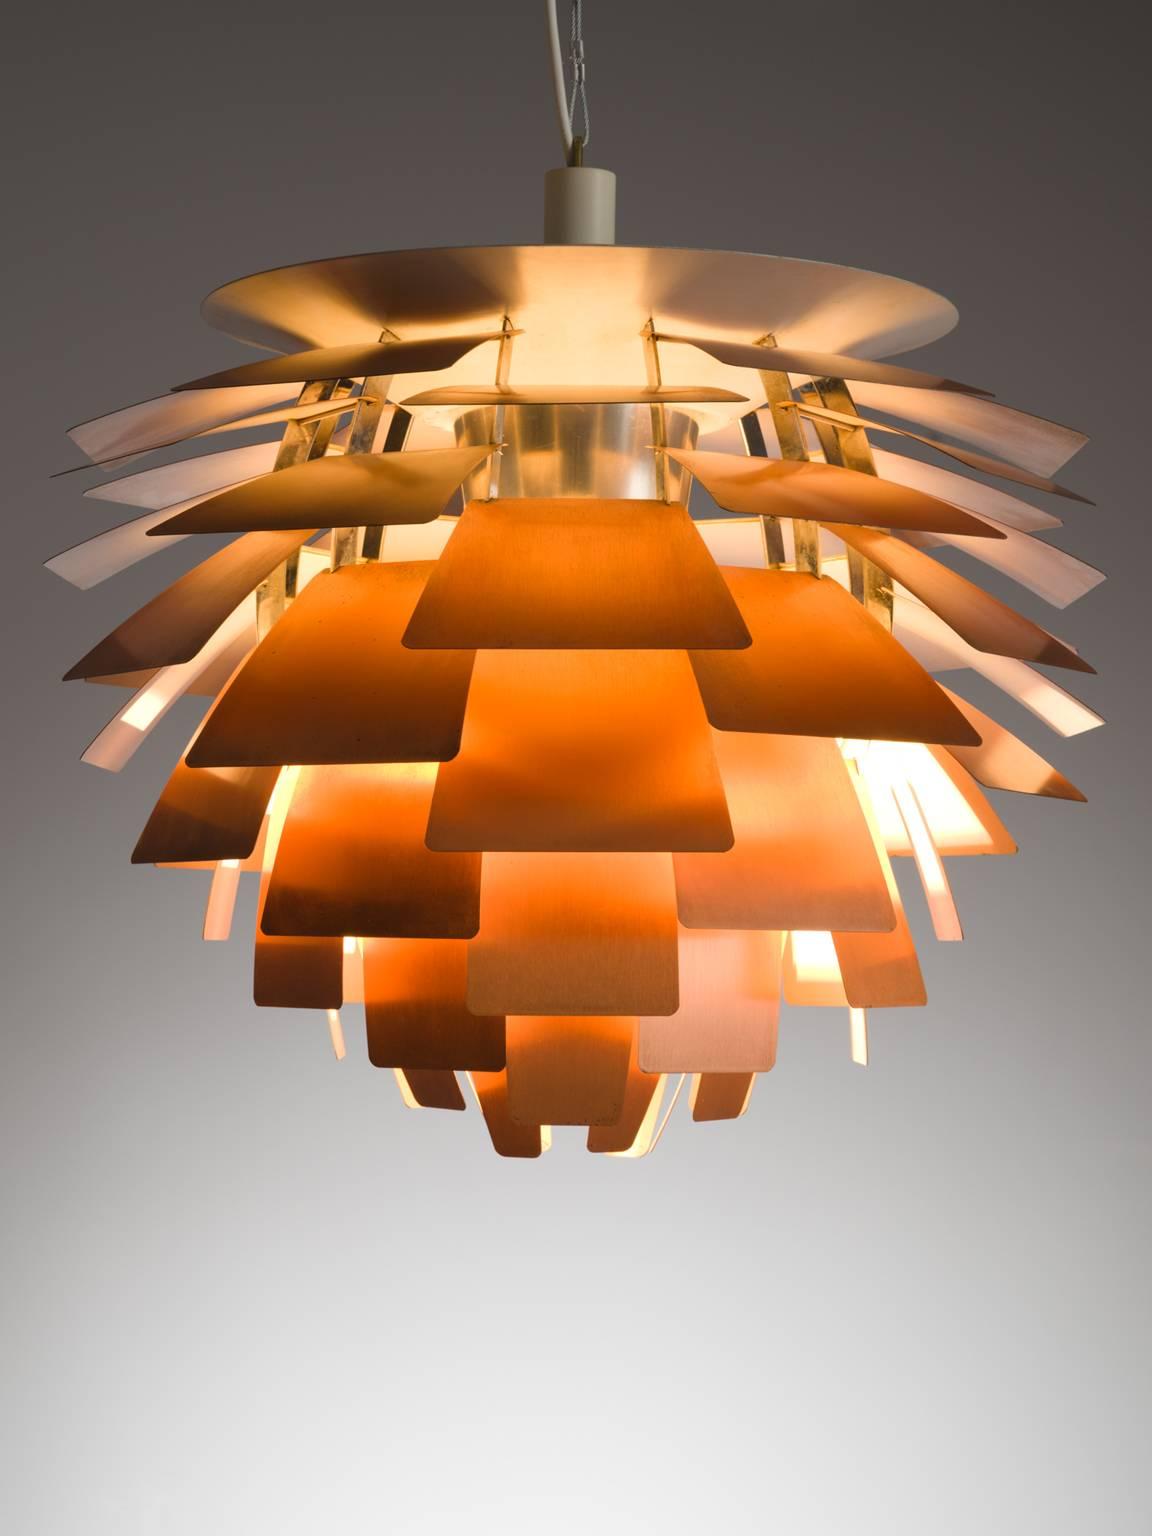 Poul Henningsen for Louis Poulsen, 'PH-Artichoke' pendant with copper shades, Denmark, 1957, production 1960s

This pendant has brushed copper shades in twelve layers. The principle is twelve railings staggered from each other. The light partition